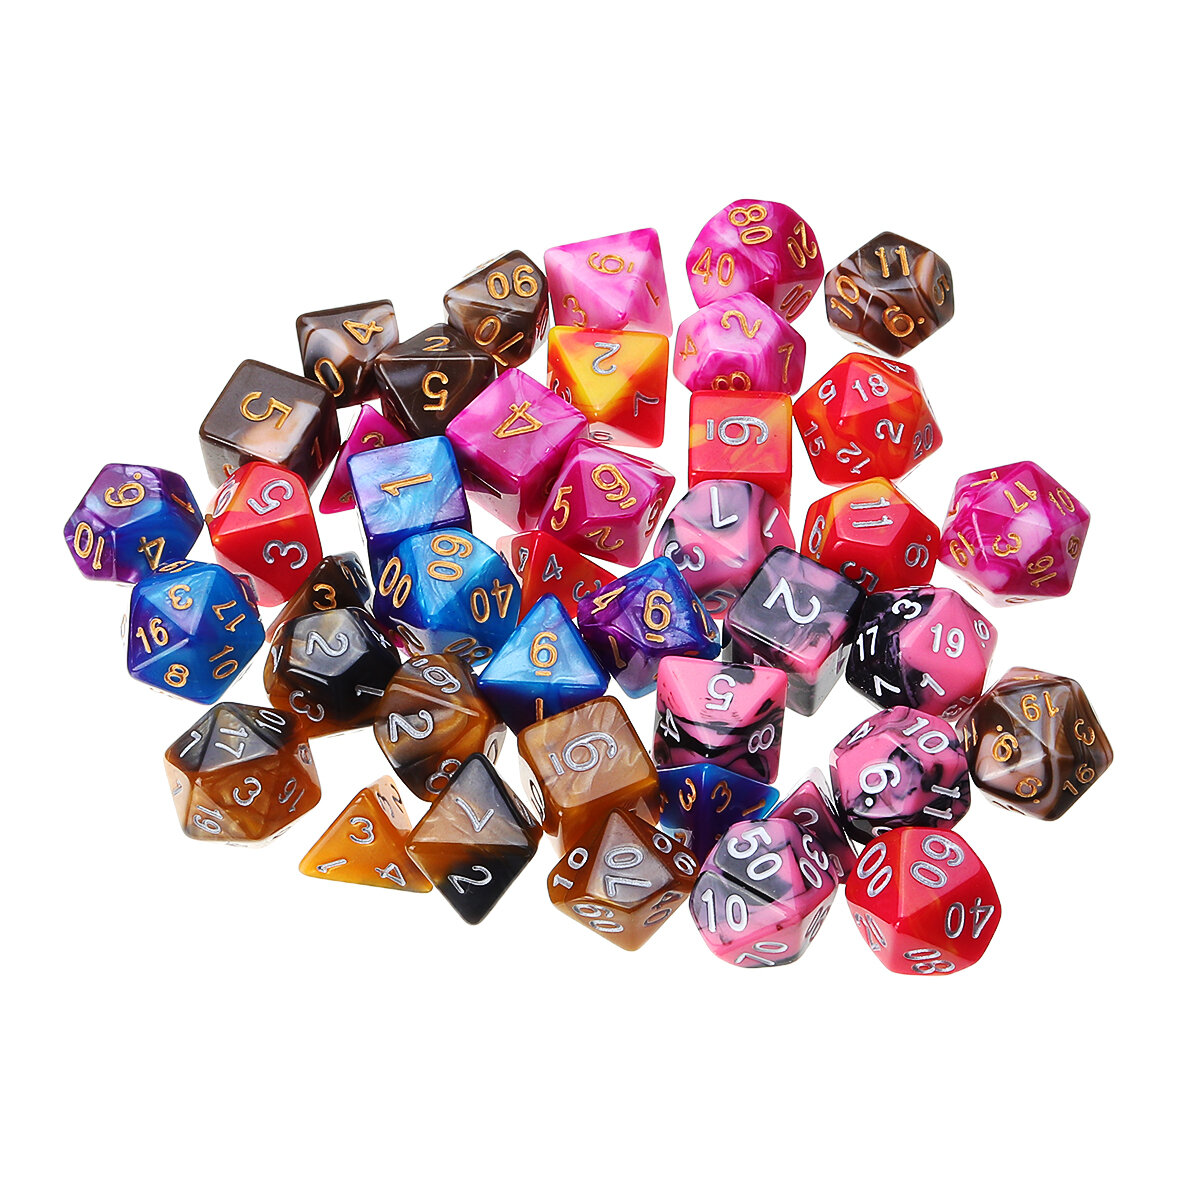 New 42Pcs Polyhedral Dice Set Multi-sied Dices For Dungeons & Dragons DND MTG RPG D4-D20 Game + Bag